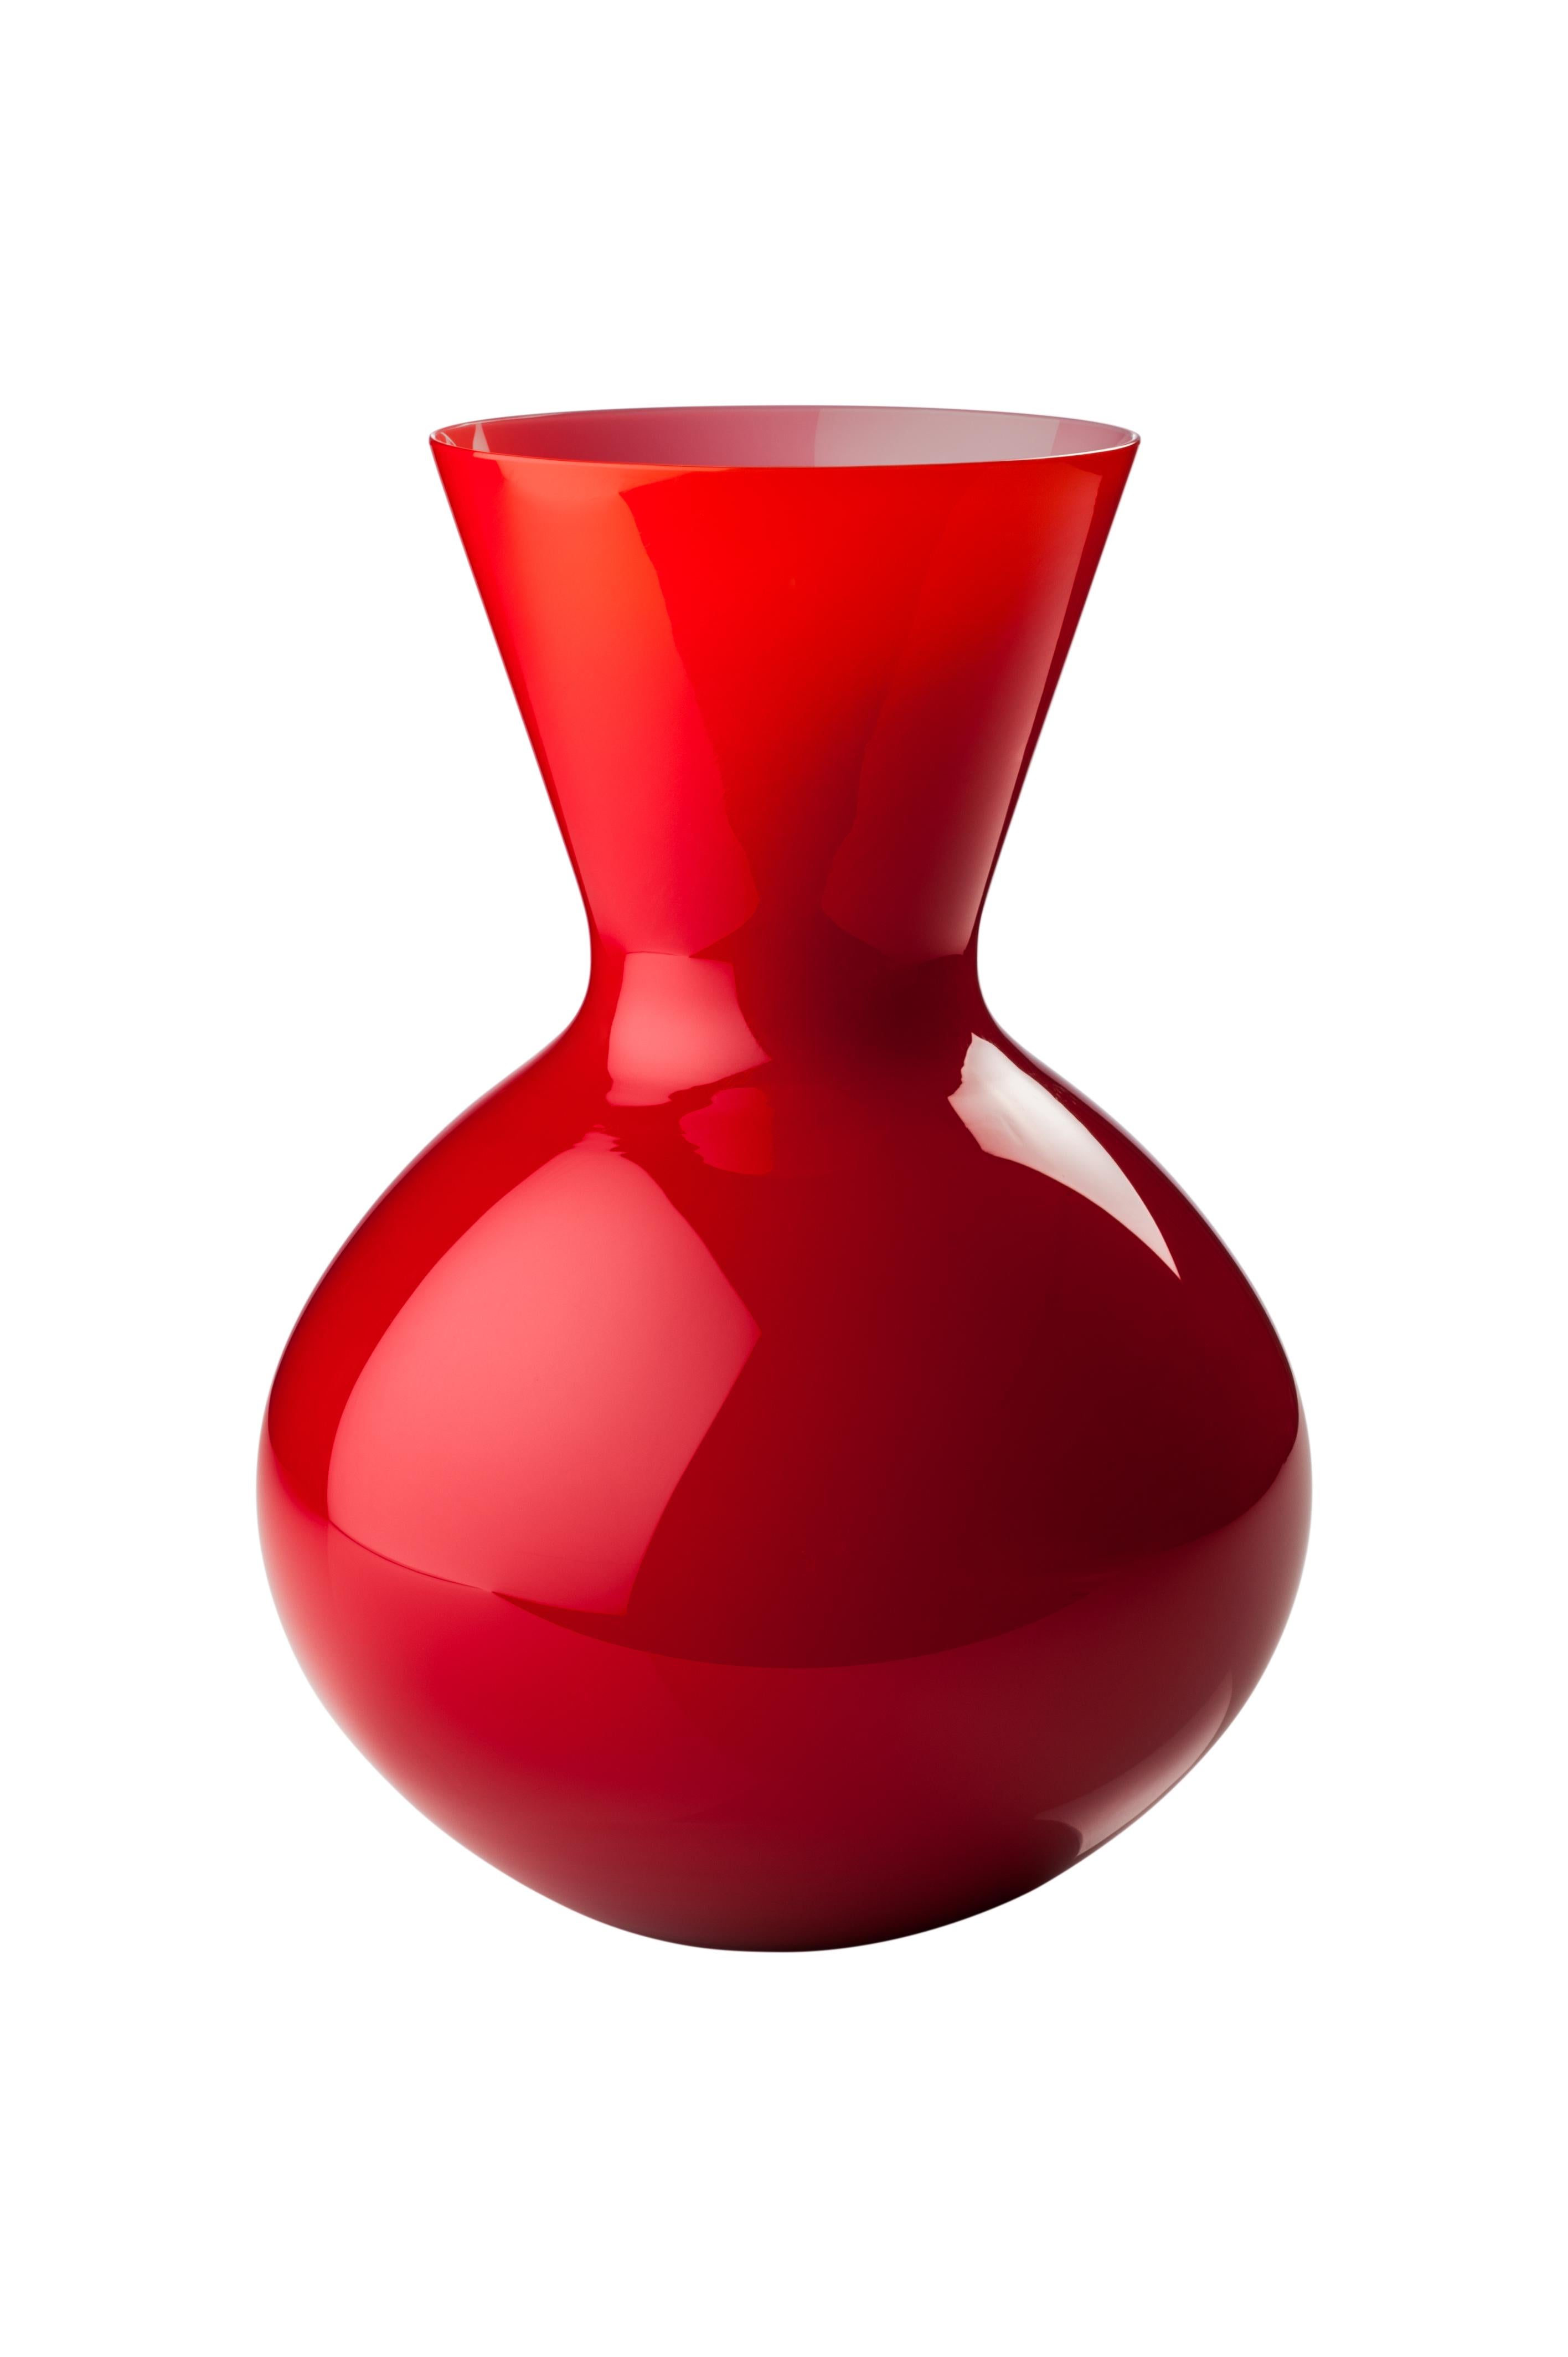 Venini glass vase with round body and angular shaped neck in red designed in 2016. Perfect for indoor home decor as container or strong statement piece for any room. Also available in other colors on 1stdibs.
 